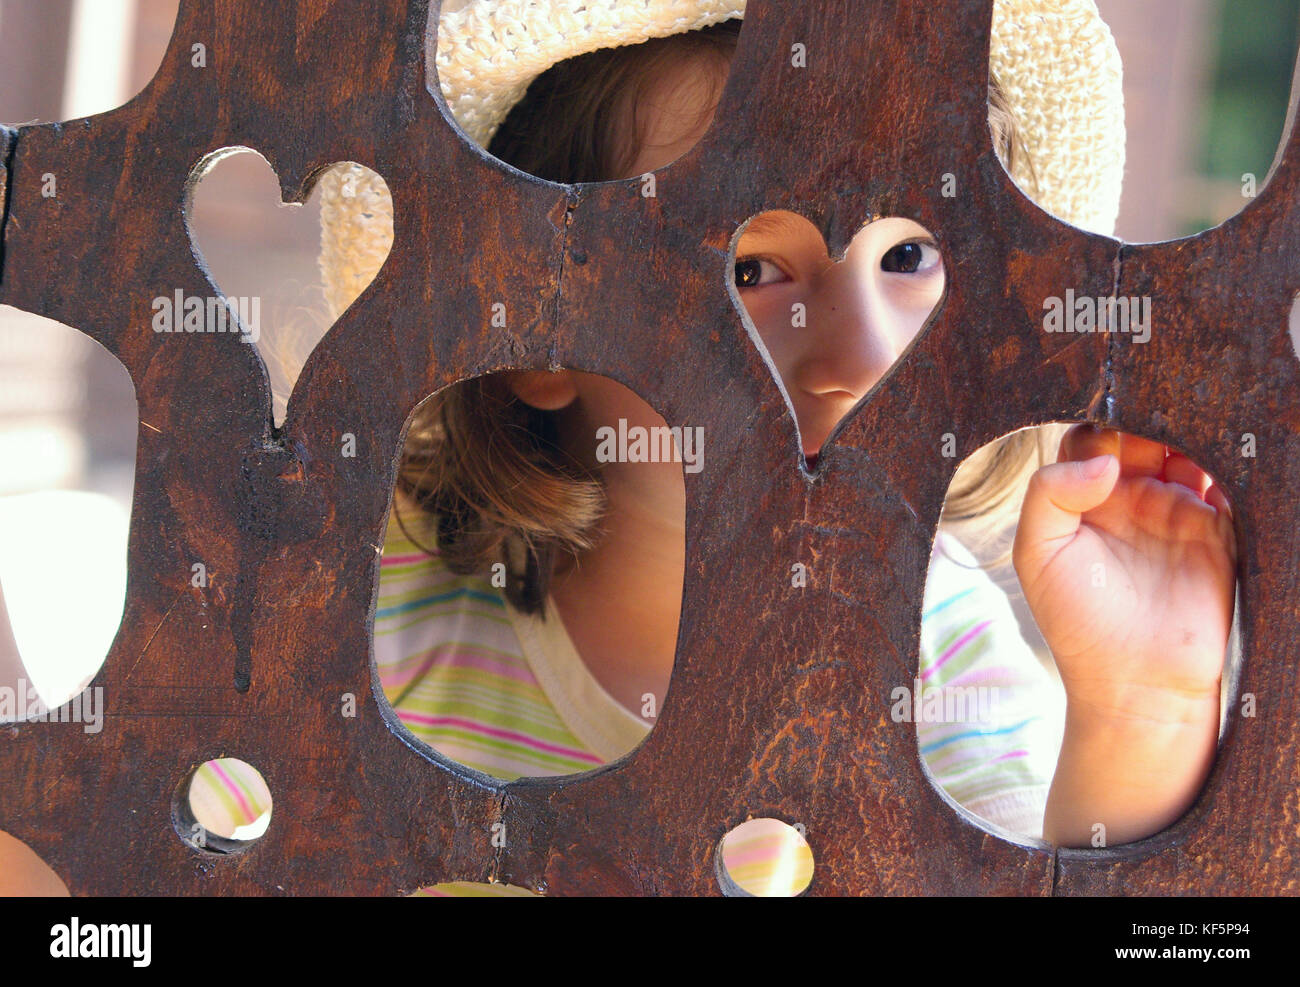 Cute little girl peeking behind heart shaped wooden fence, looking with curiosity Stock Photo